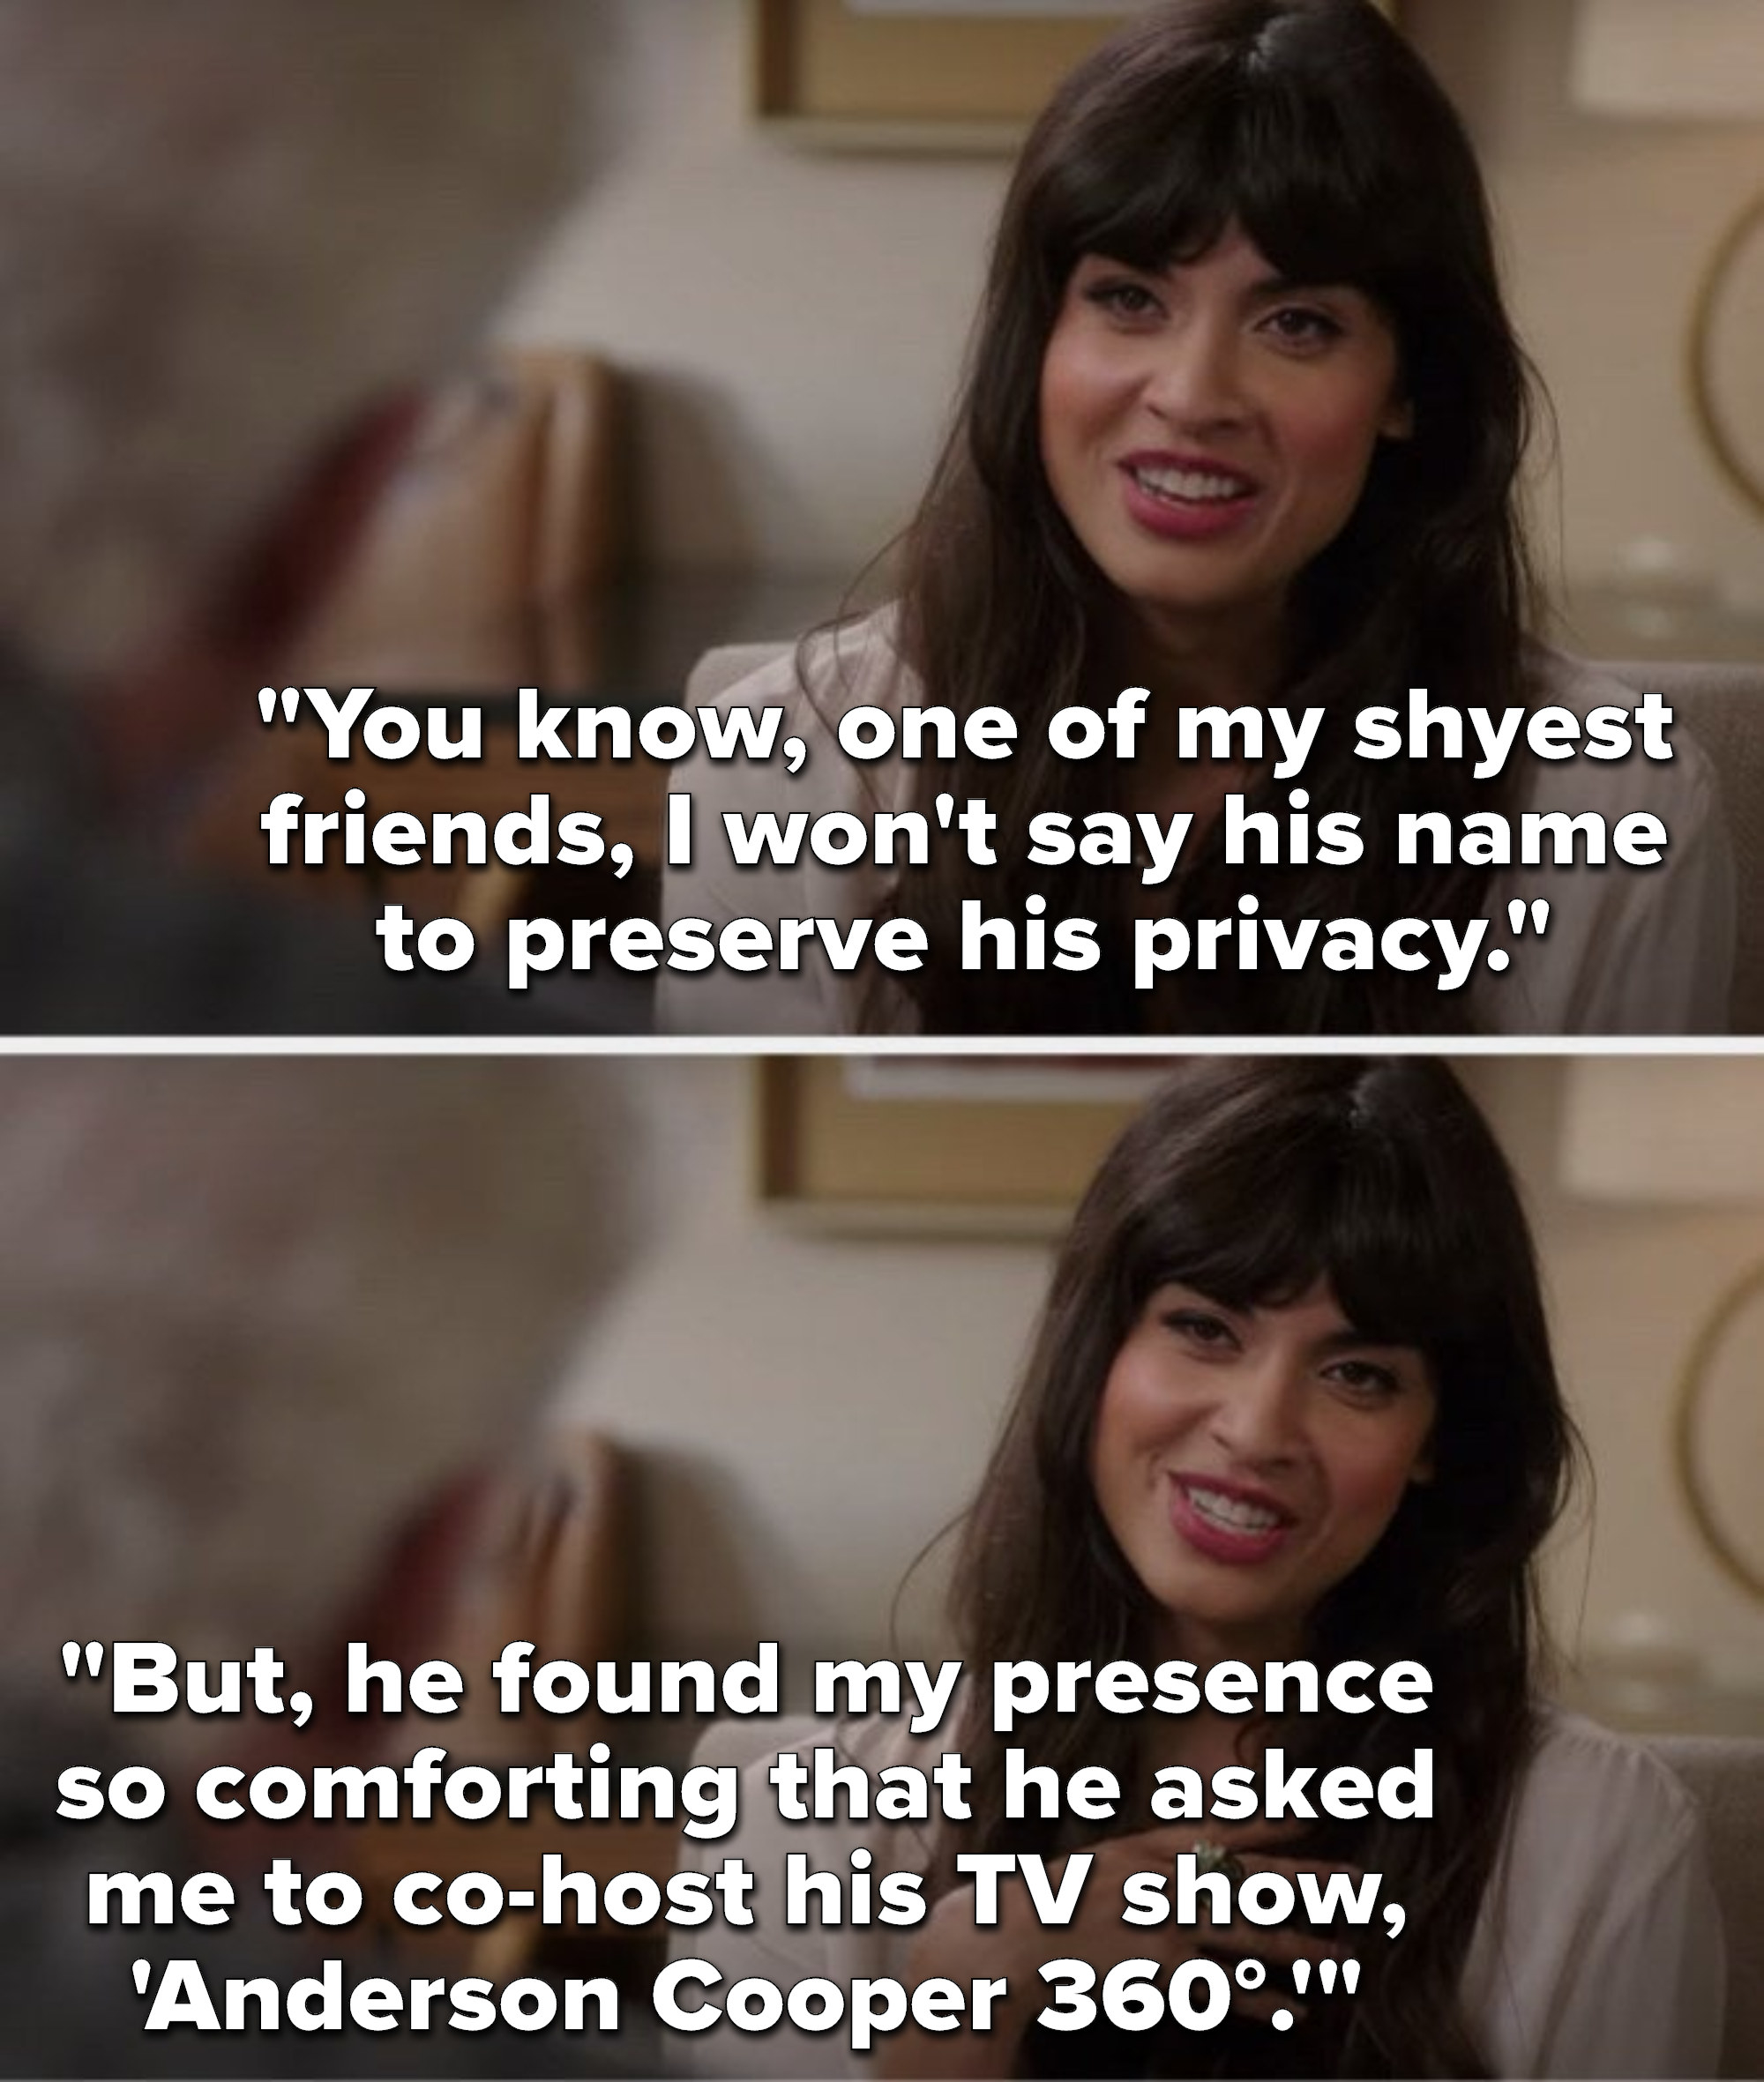 Tahani says, &quot;You know, one of my shyest friends, I won&#x27;t say his name to preserve his privacy, but, he found my presence so comforting that he asked me to co-host his TV show, &#x27;Anderson Cooper 360°&#x27;&quot;